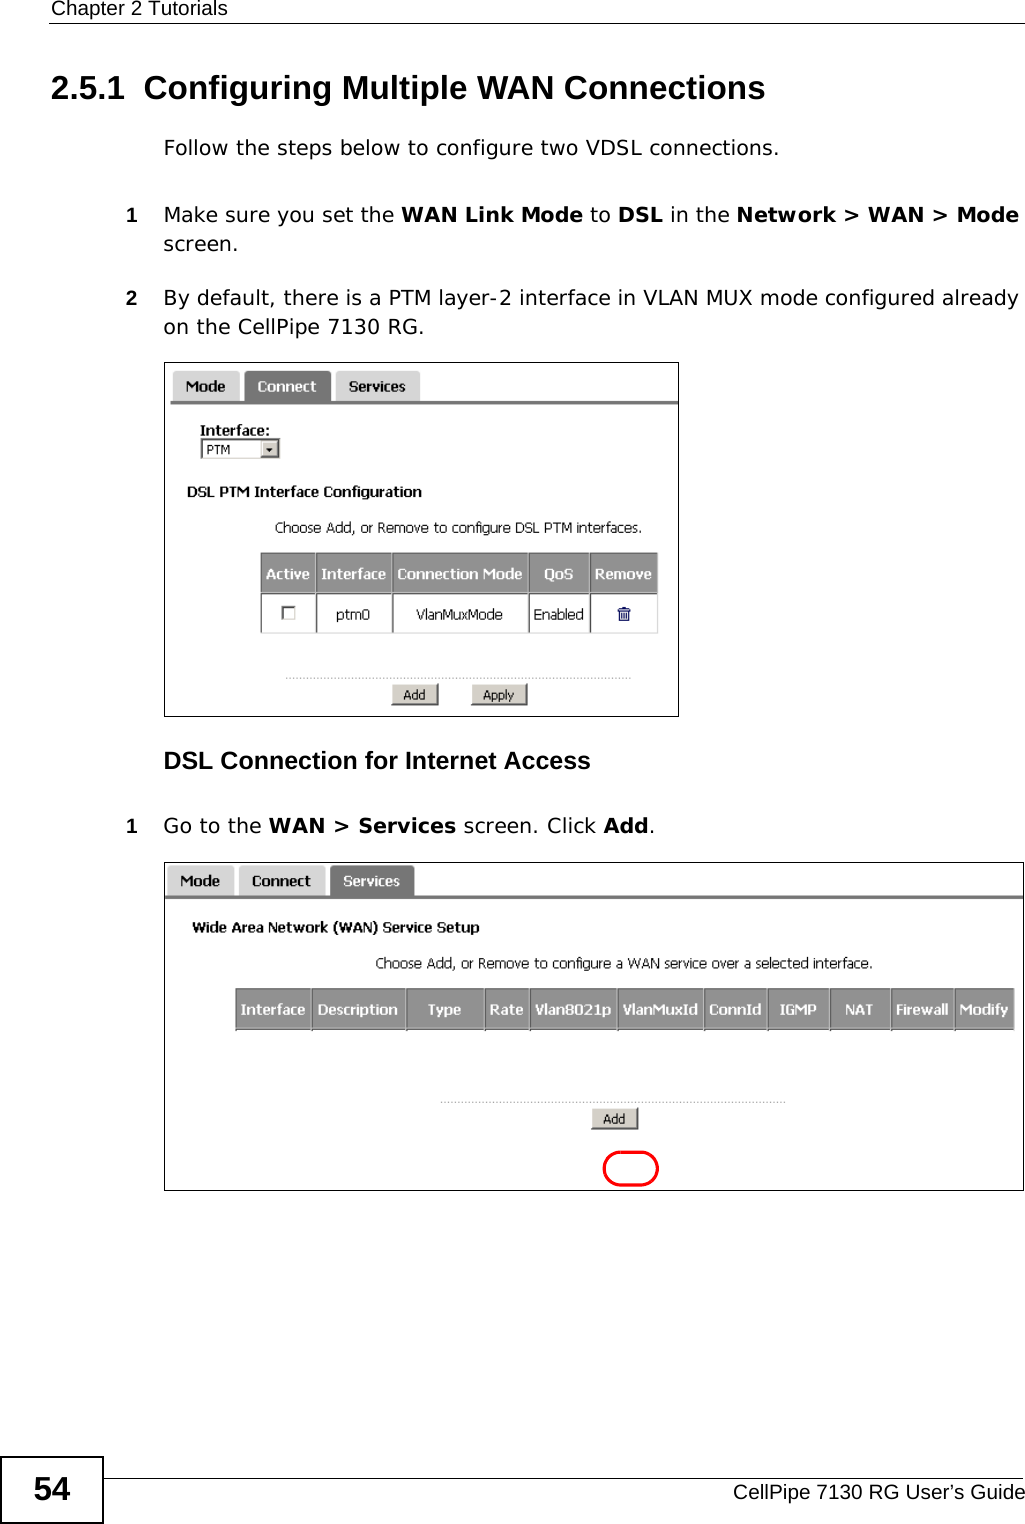 Chapter 2 TutorialsCellPipe 7130 RG User’s Guide542.5.1  Configuring Multiple WAN ConnectionsFollow the steps below to configure two VDSL connections.1Make sure you set the WAN Link Mode to DSL in the Network &gt; WAN &gt; Mode screen.2By default, there is a PTM layer-2 interface in VLAN MUX mode configured already on the CellPipe 7130 RG.DSL Connection for Internet Access1Go to the WAN &gt; Services screen. Click Add.